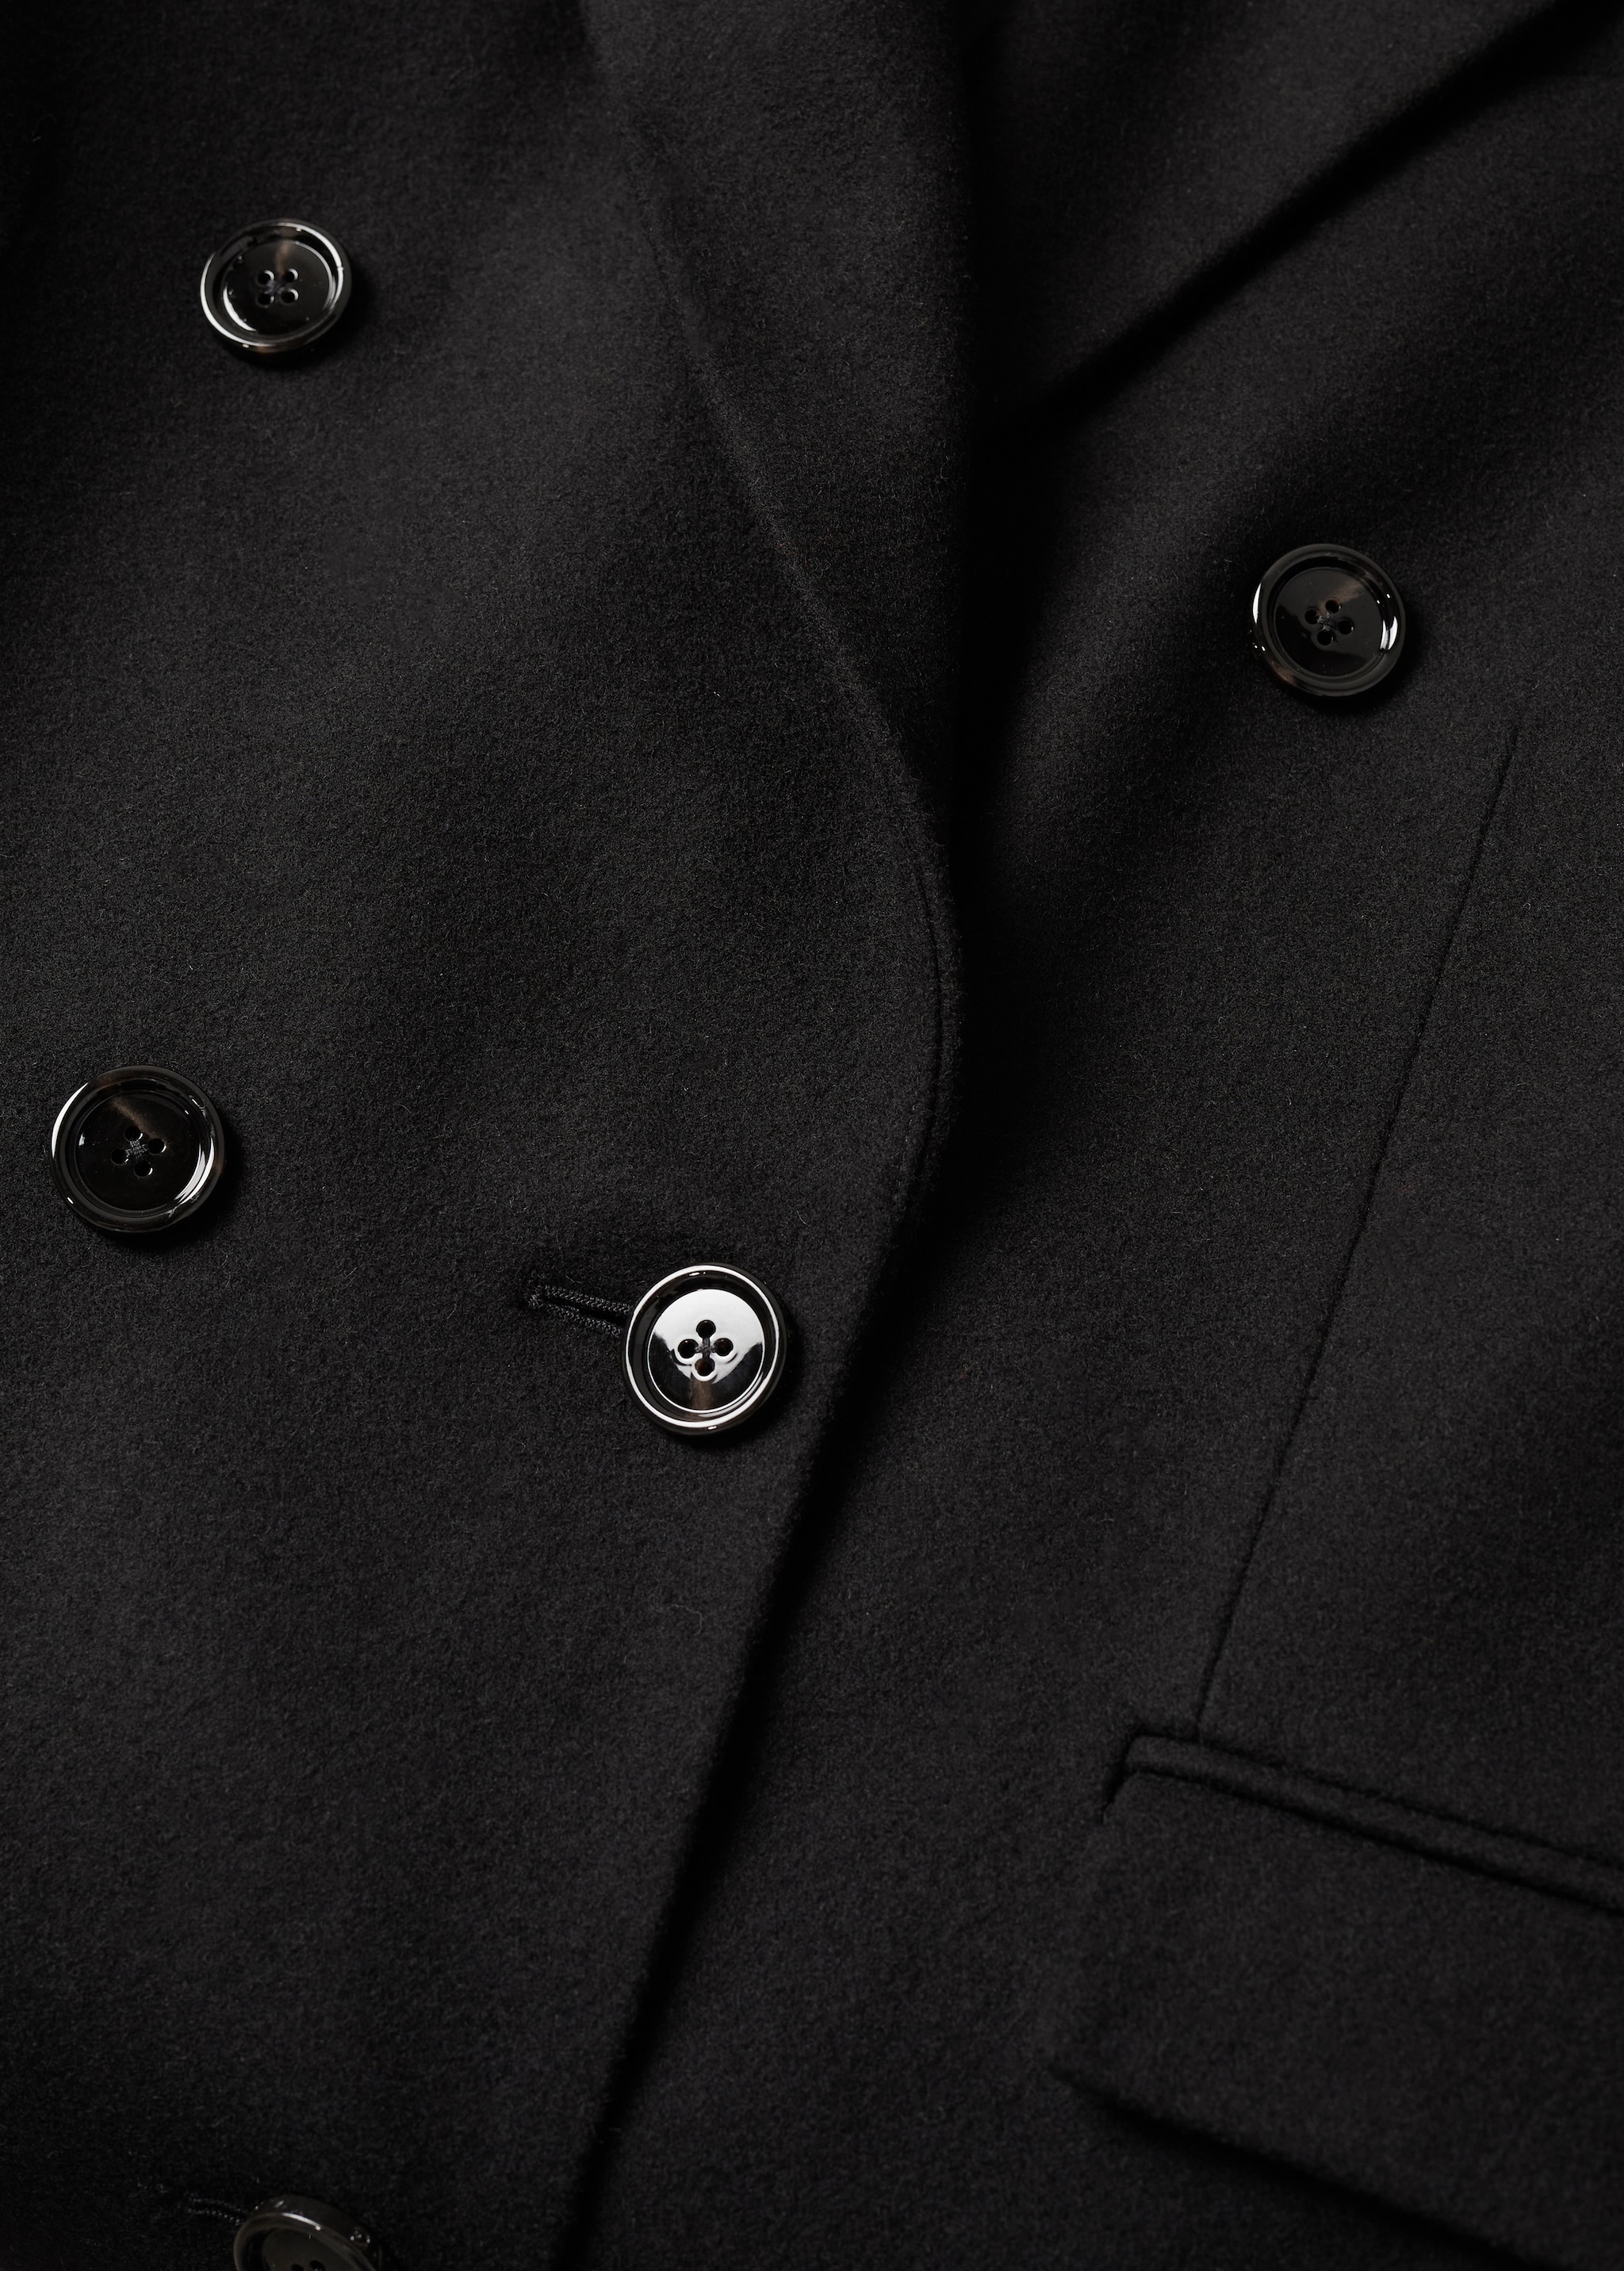 Double-breasted wool coat - Details of the article 8